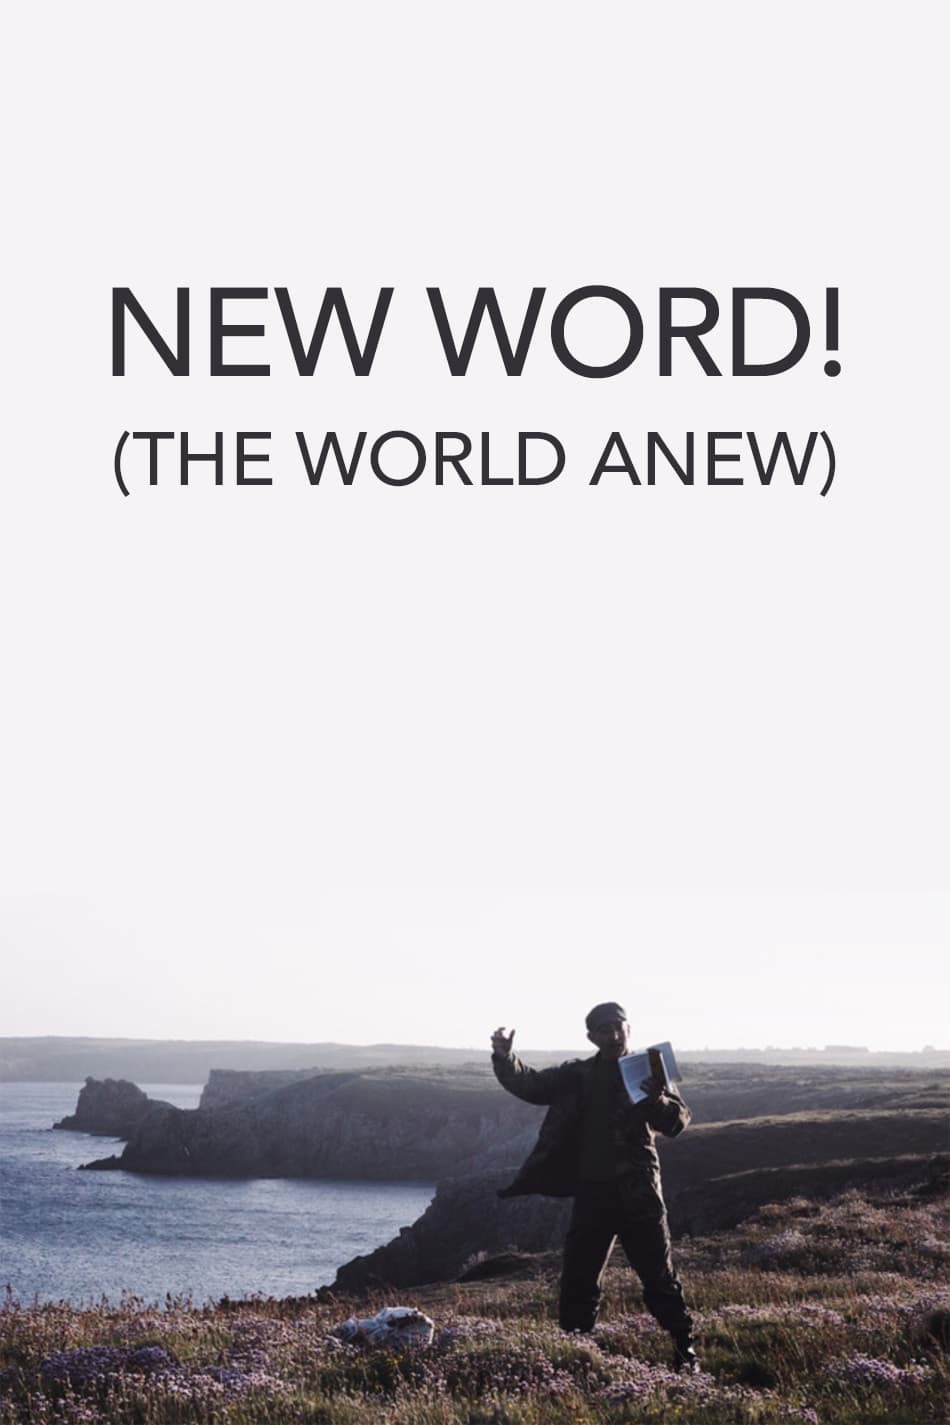 New World! (The World Anew)